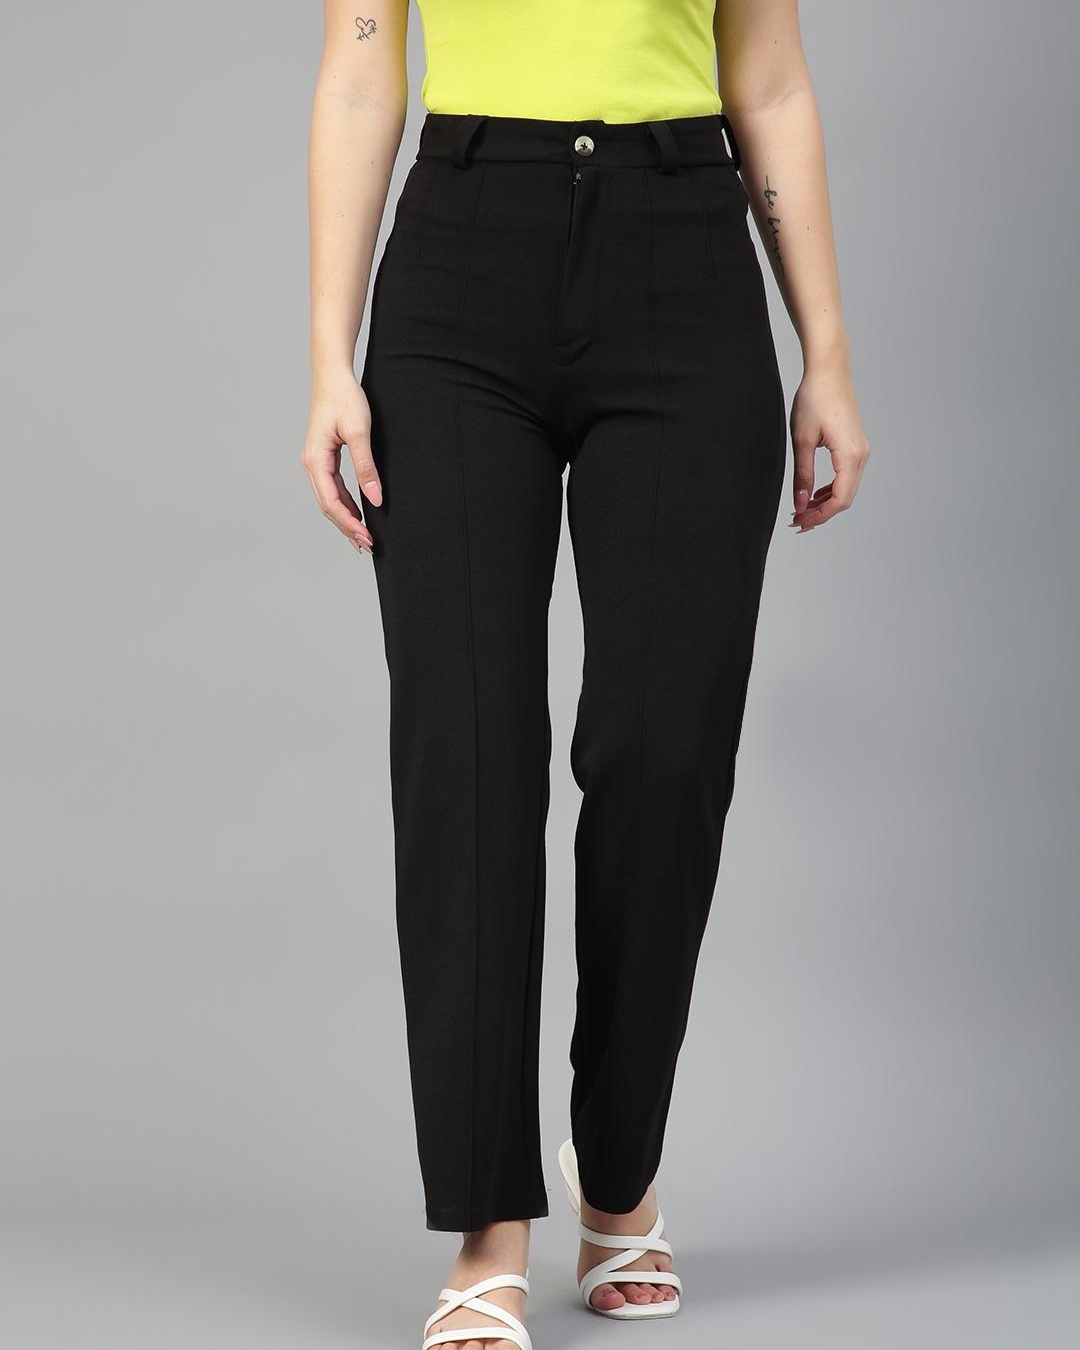 Women's Black Straight Fit Trousers